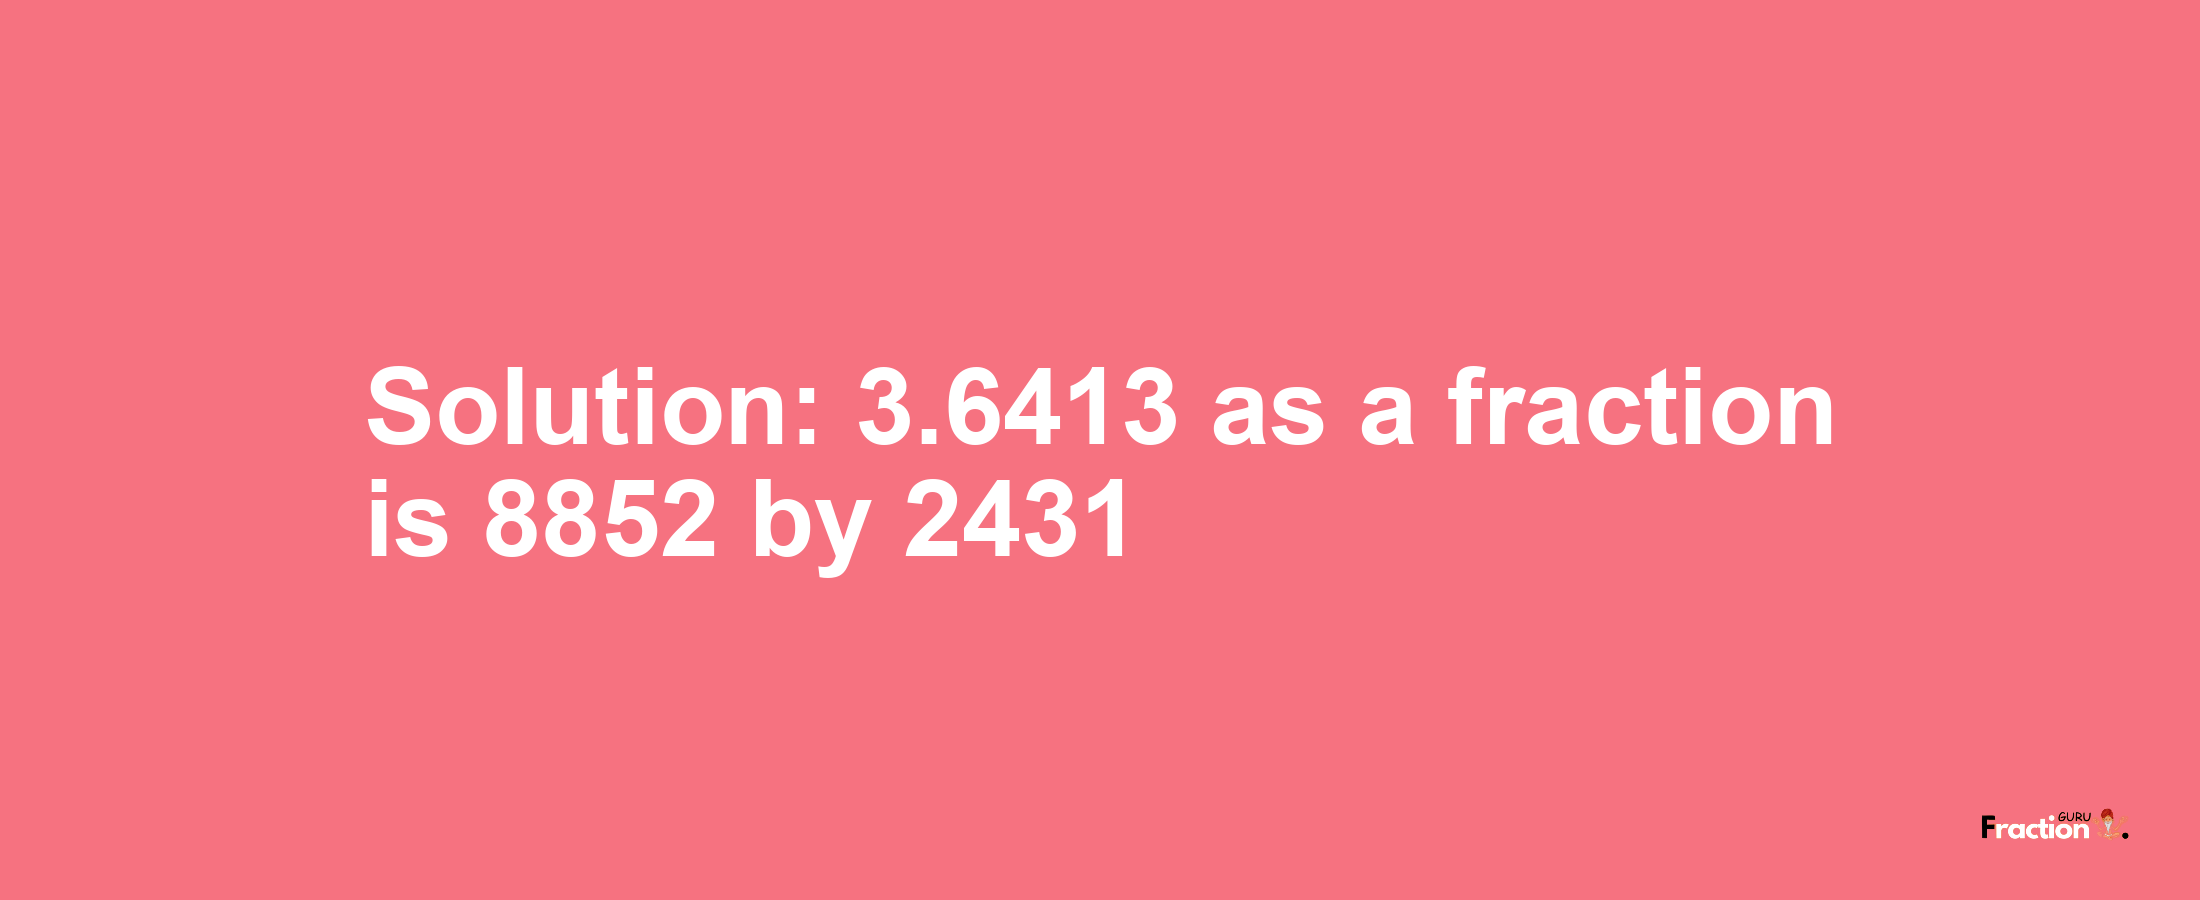 Solution:3.6413 as a fraction is 8852/2431